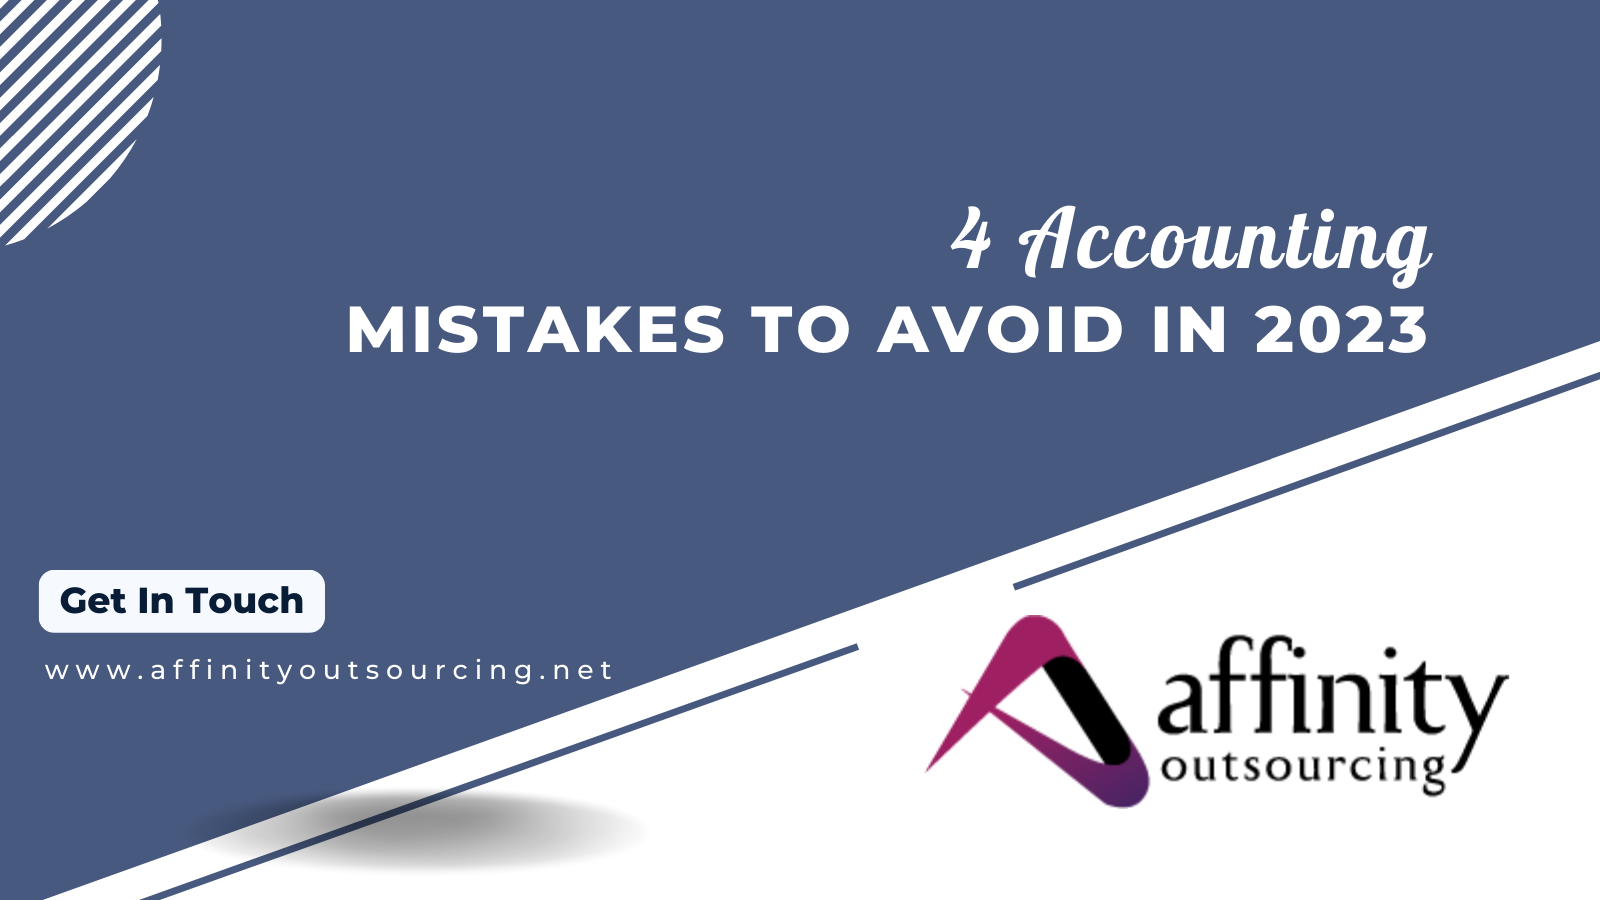 4 Accounting Mistakes to Avoid in 2023